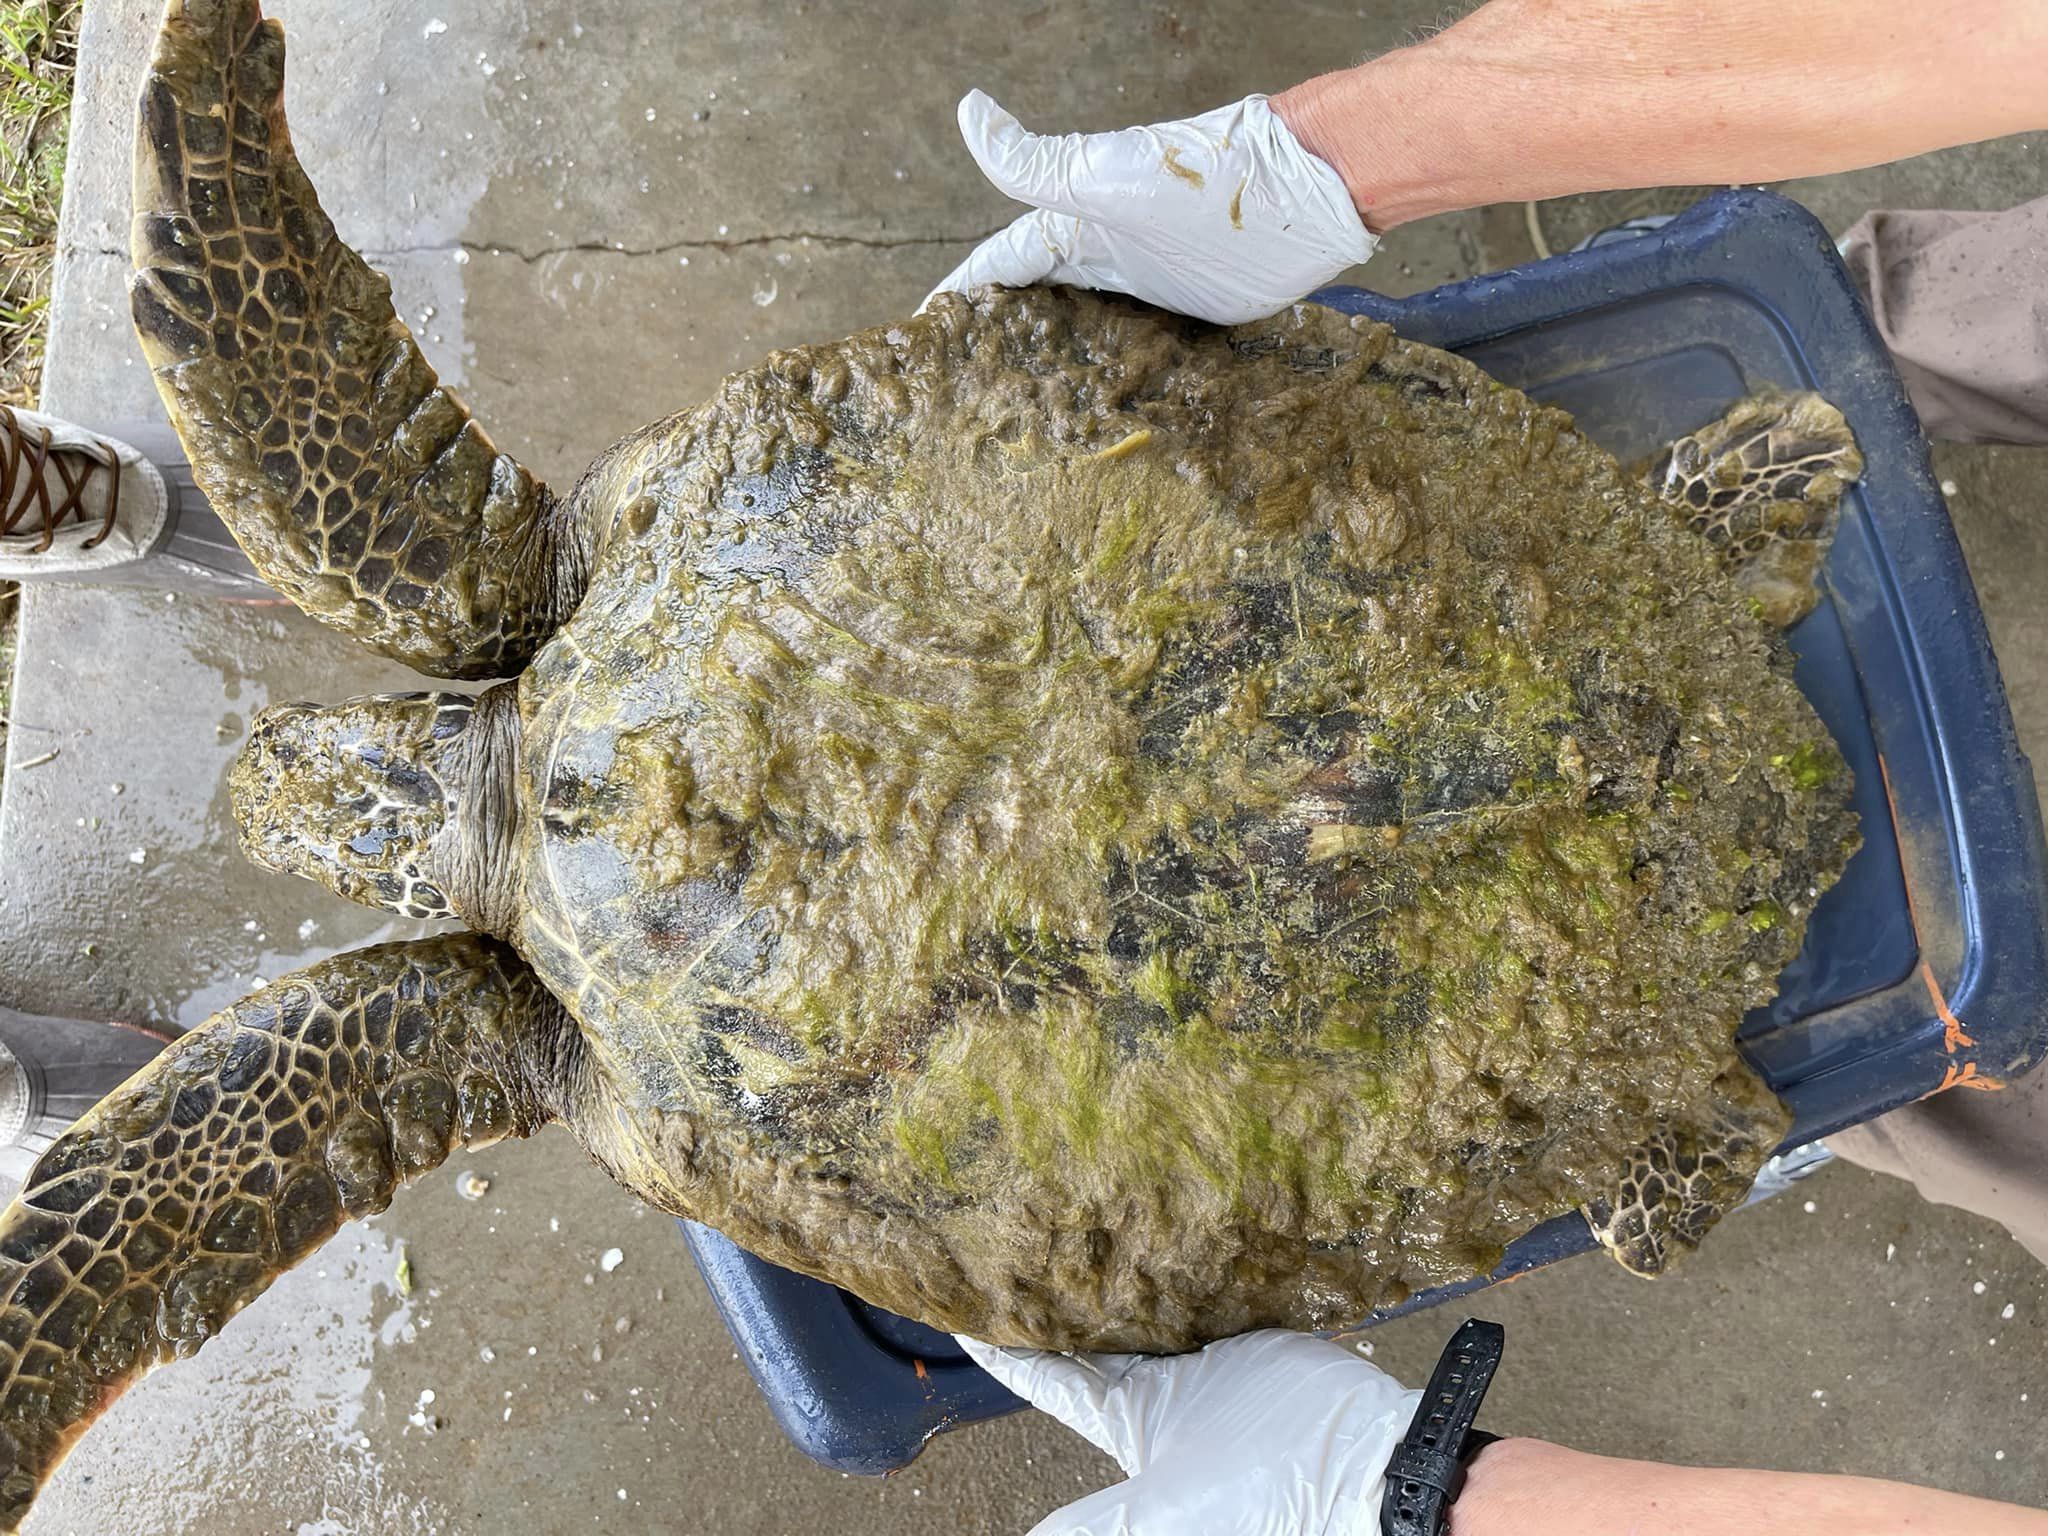 Photo of Slash the green sea turtle after rescue with algae covering his carapace